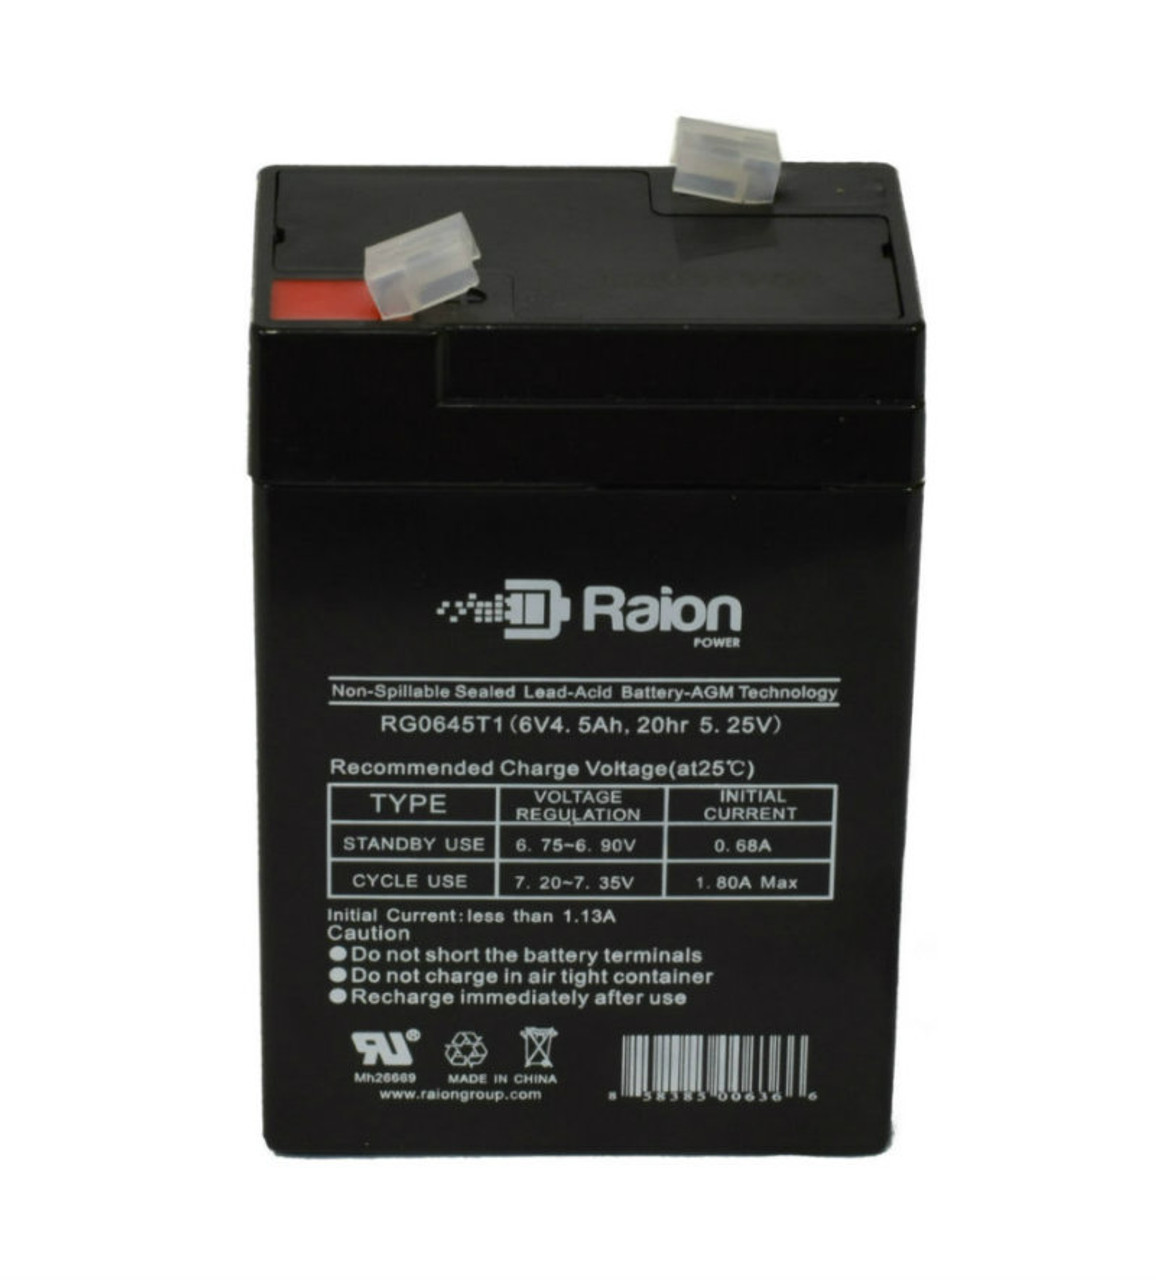 Raion Power RG0645T1 Replacement Battery Cartridge for National C12C